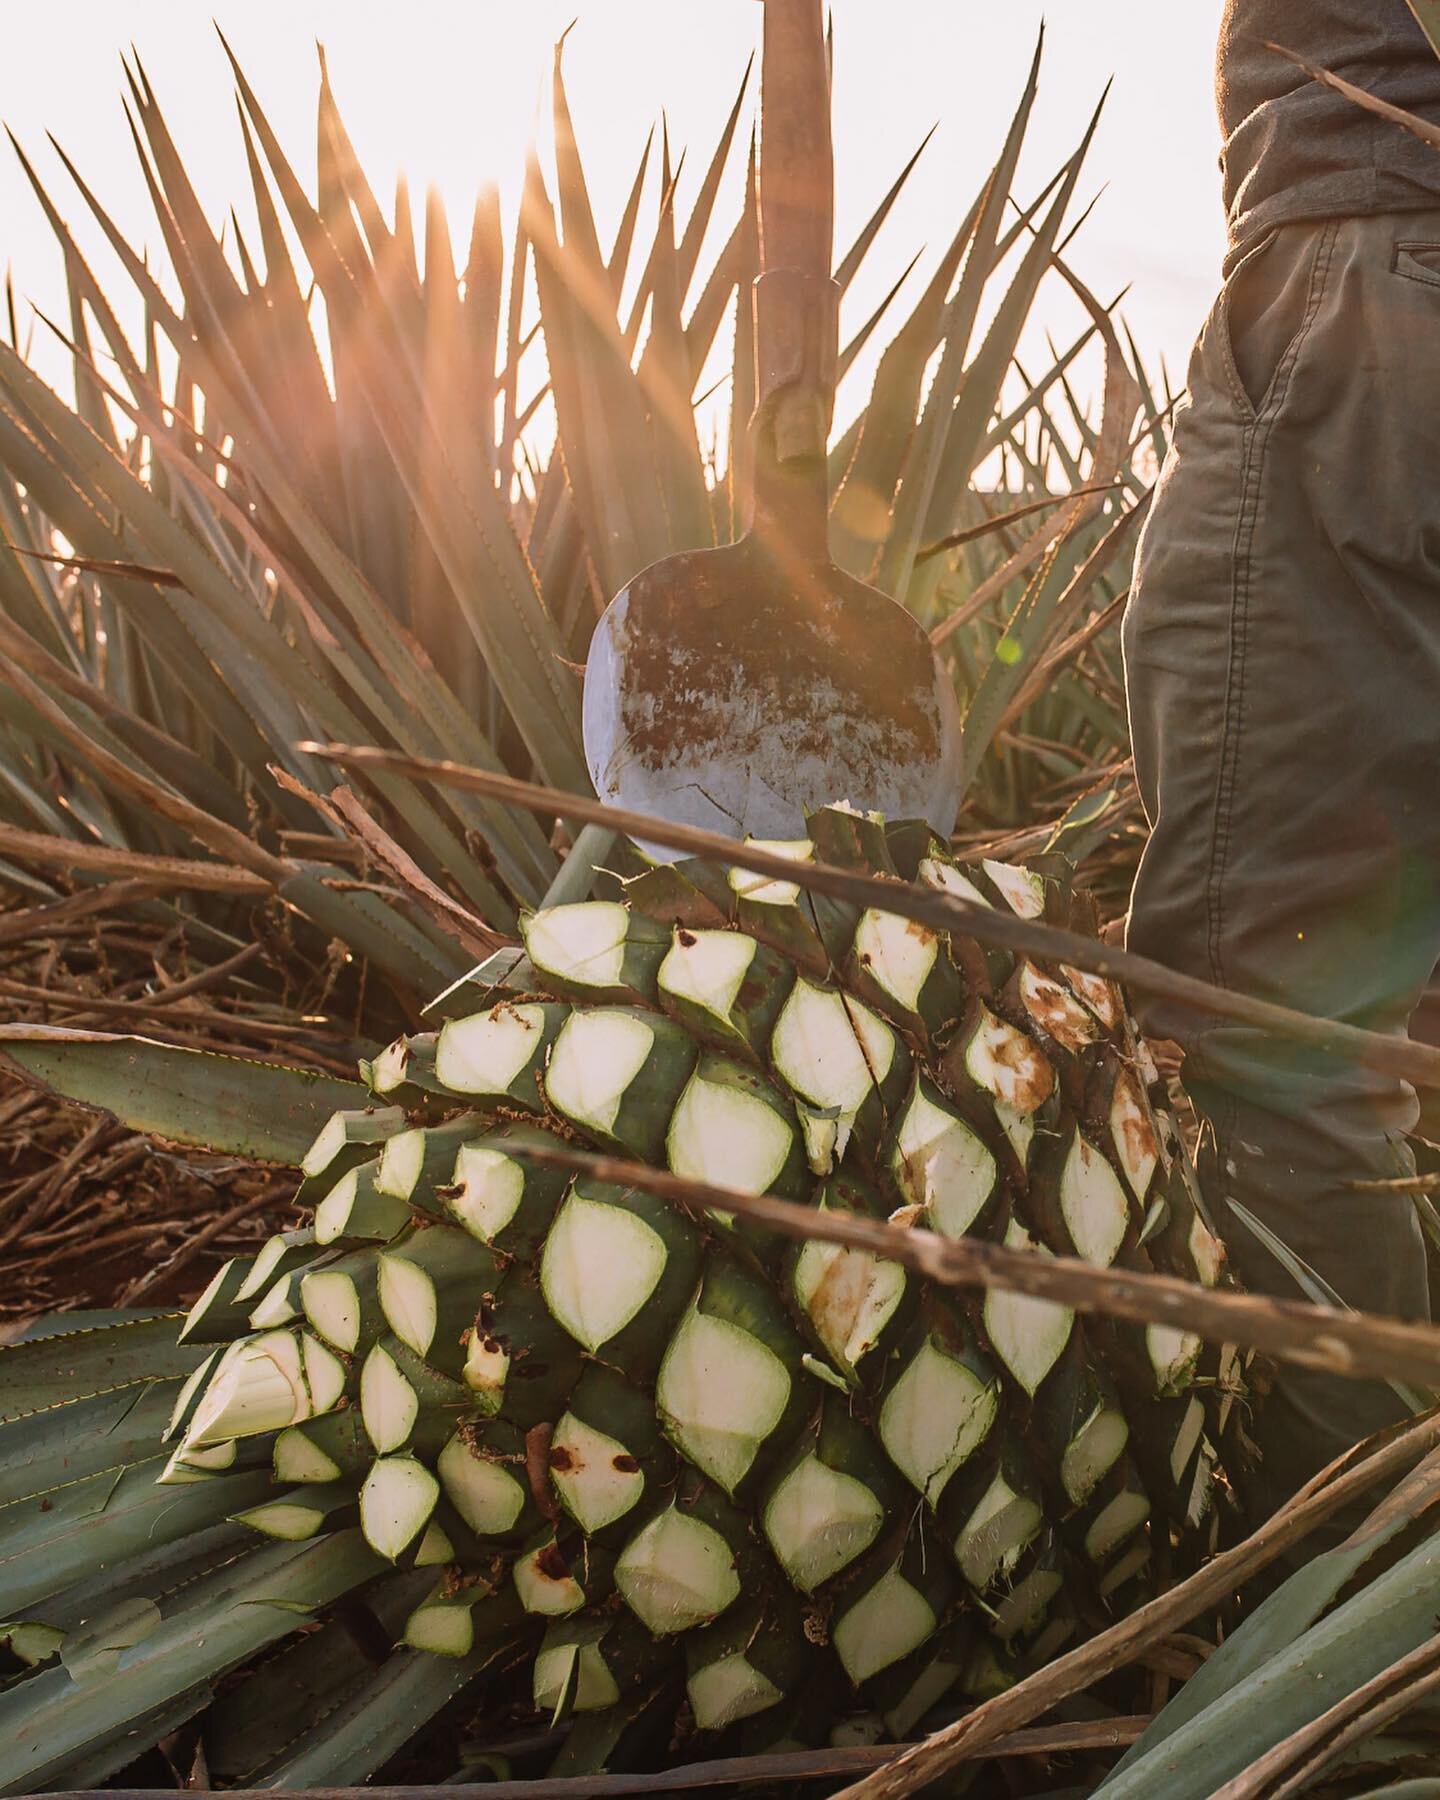 Did you know that each agave pineapple can weigh more than 30 kilos?
By choosing PRIMO, a #tequilapremium made with artisanal processes, you are supporting local producers and preserving a cultural tradition.

Click the link in our bio to learn more 